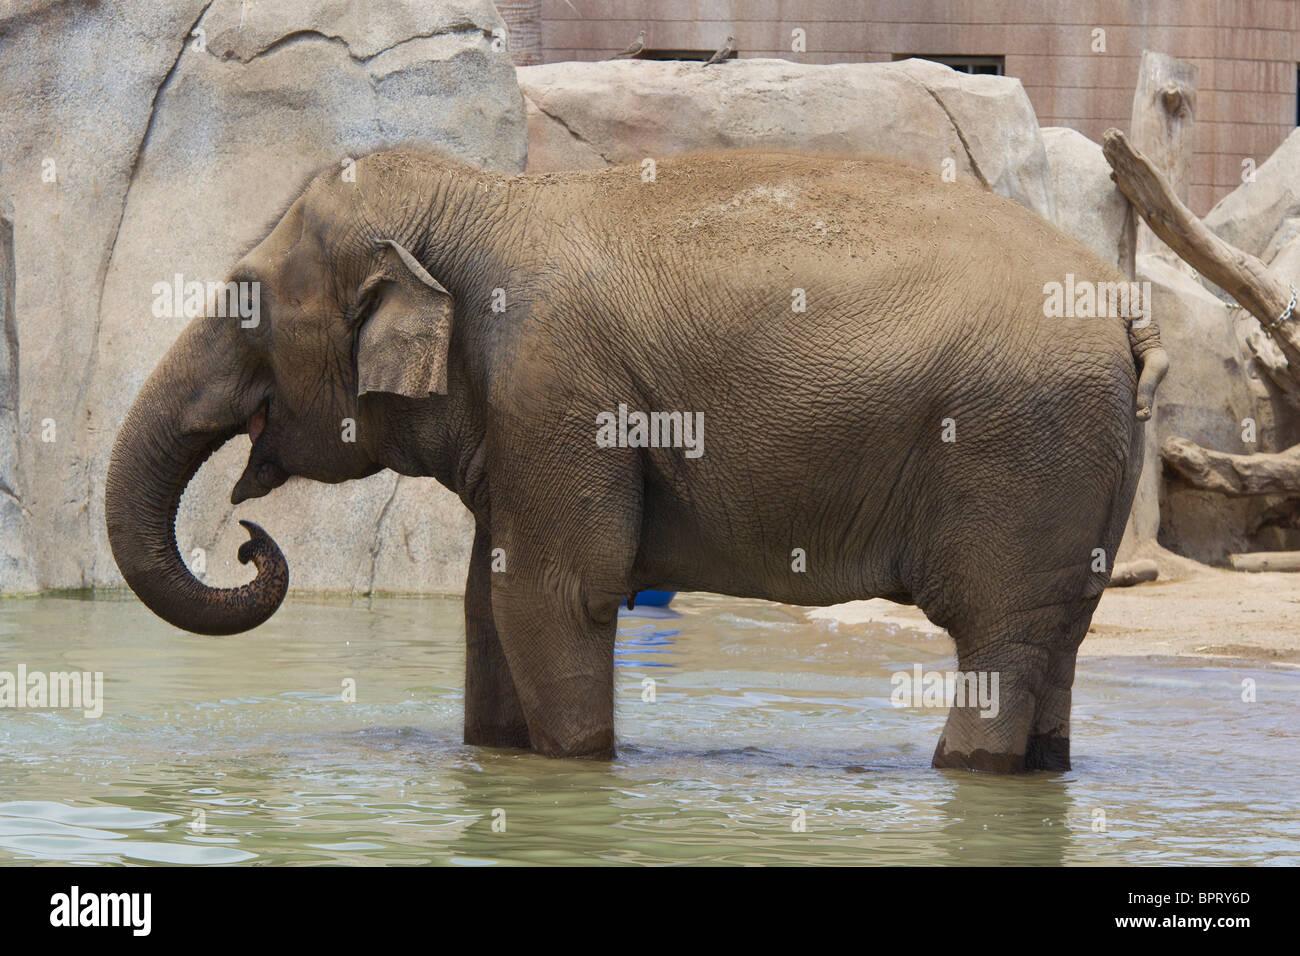 An elephant standing in a pool of water, San Diego Zoo, San Diego, California, United States of America Stock Photo